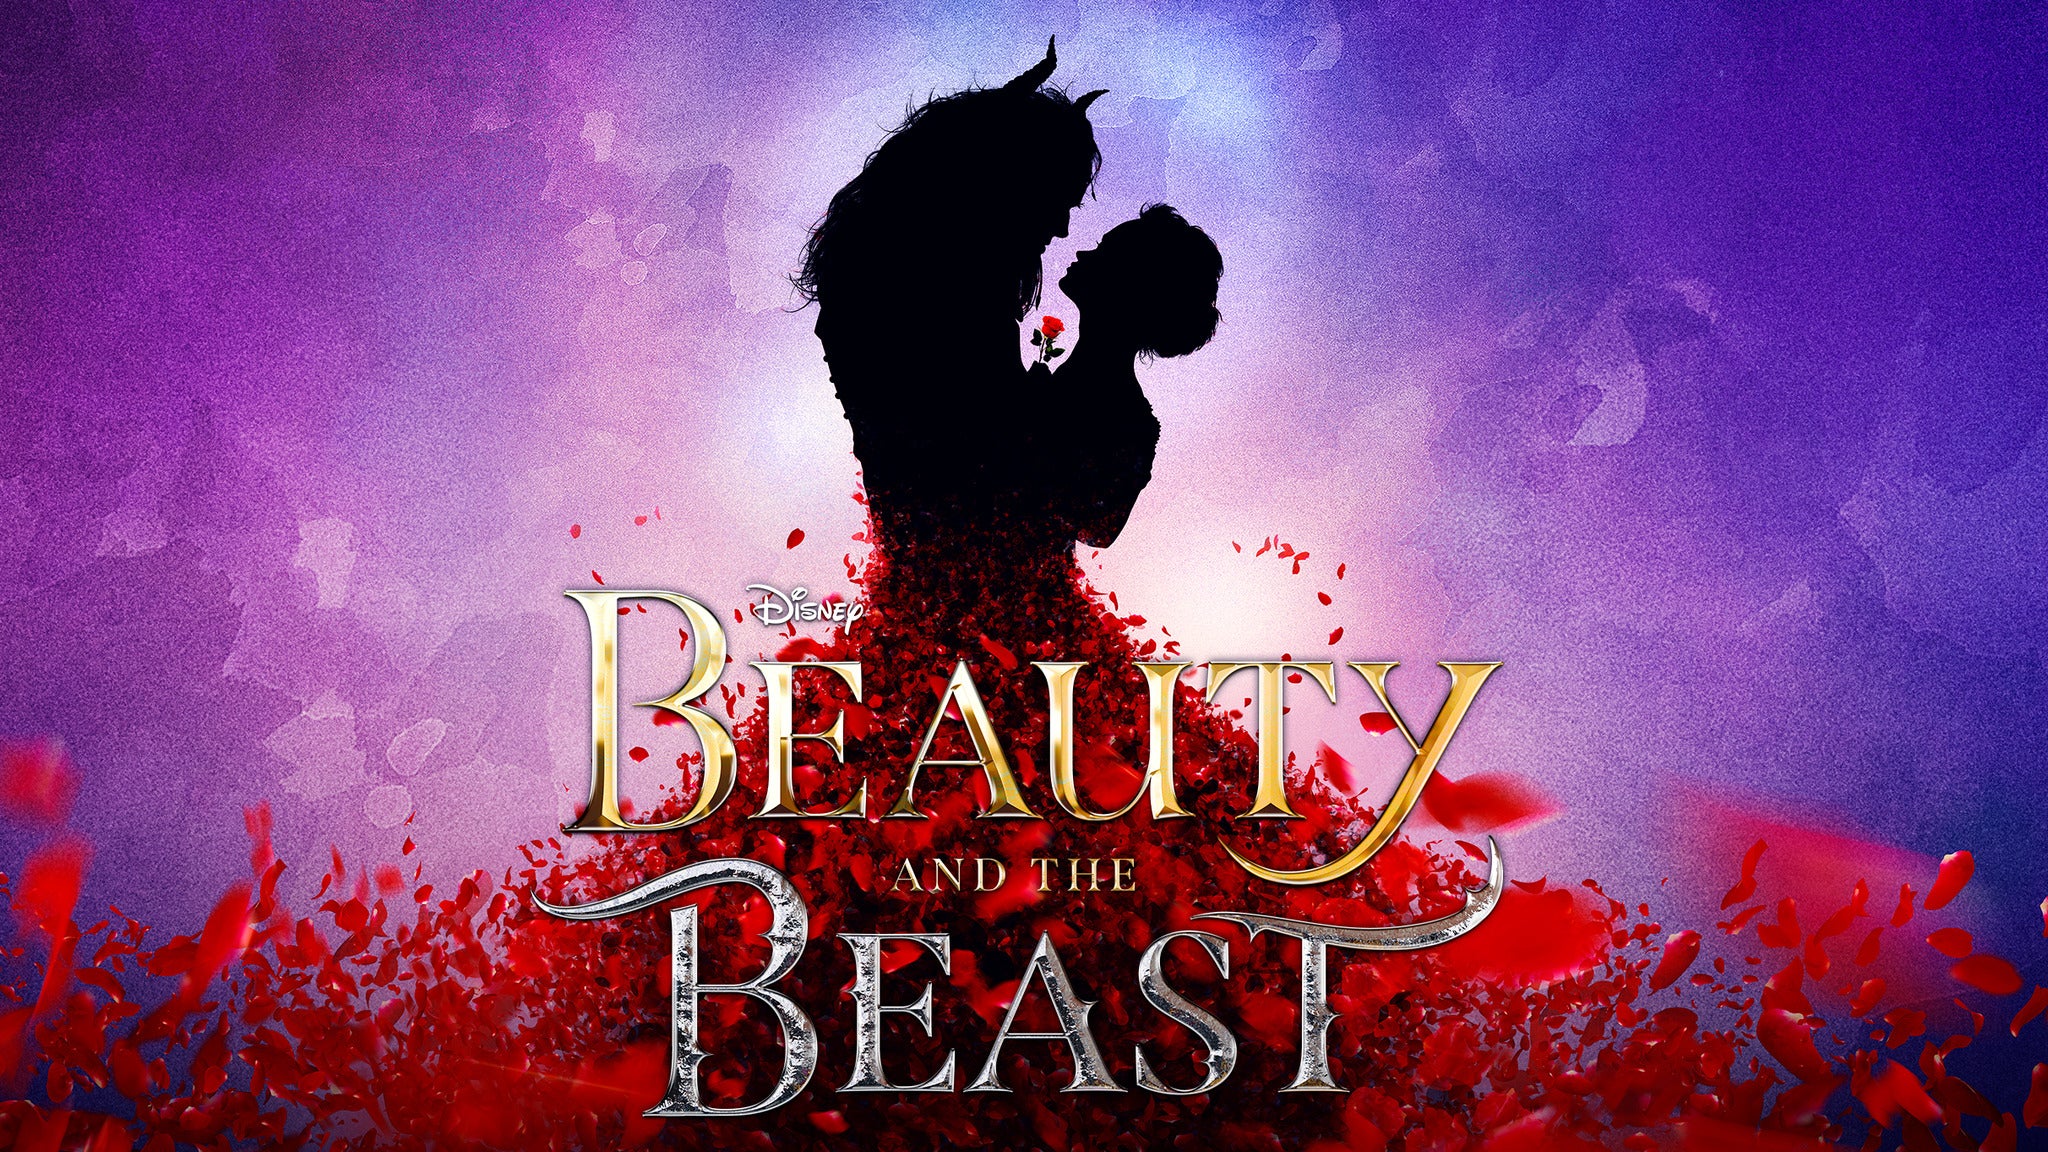 Disneys Beauty and the Beast (Touring)